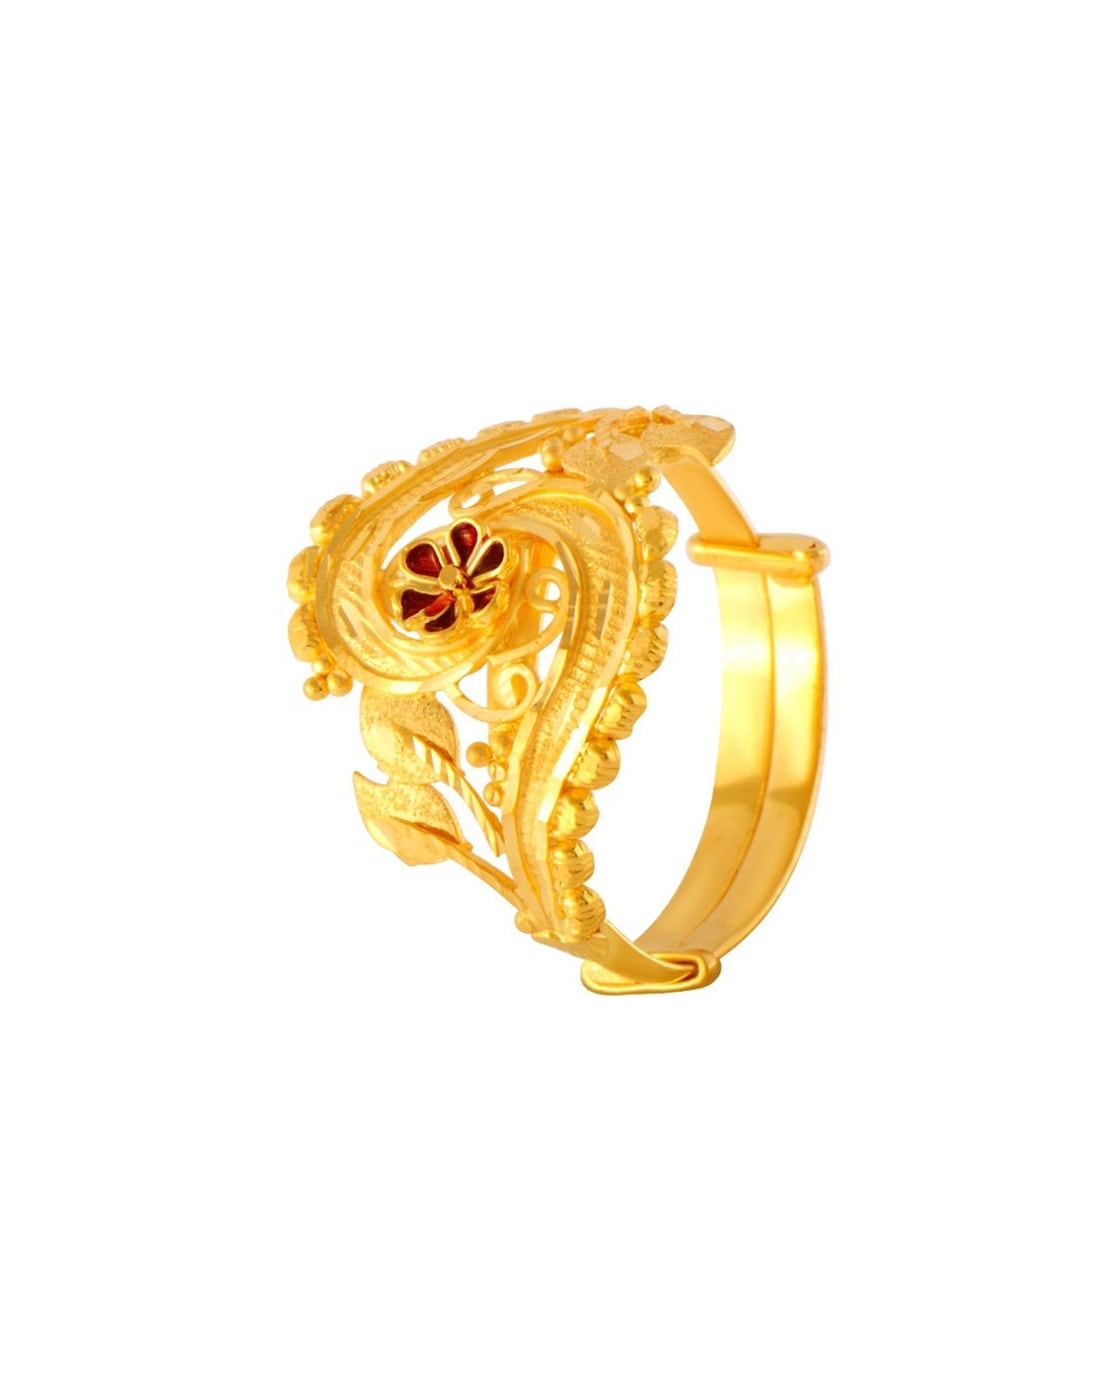 Buy P.C. Chandra Jewellers 22KT(916) Yellow Gold Floral Design Ring for  Women - 2 Grams at Amazon.in